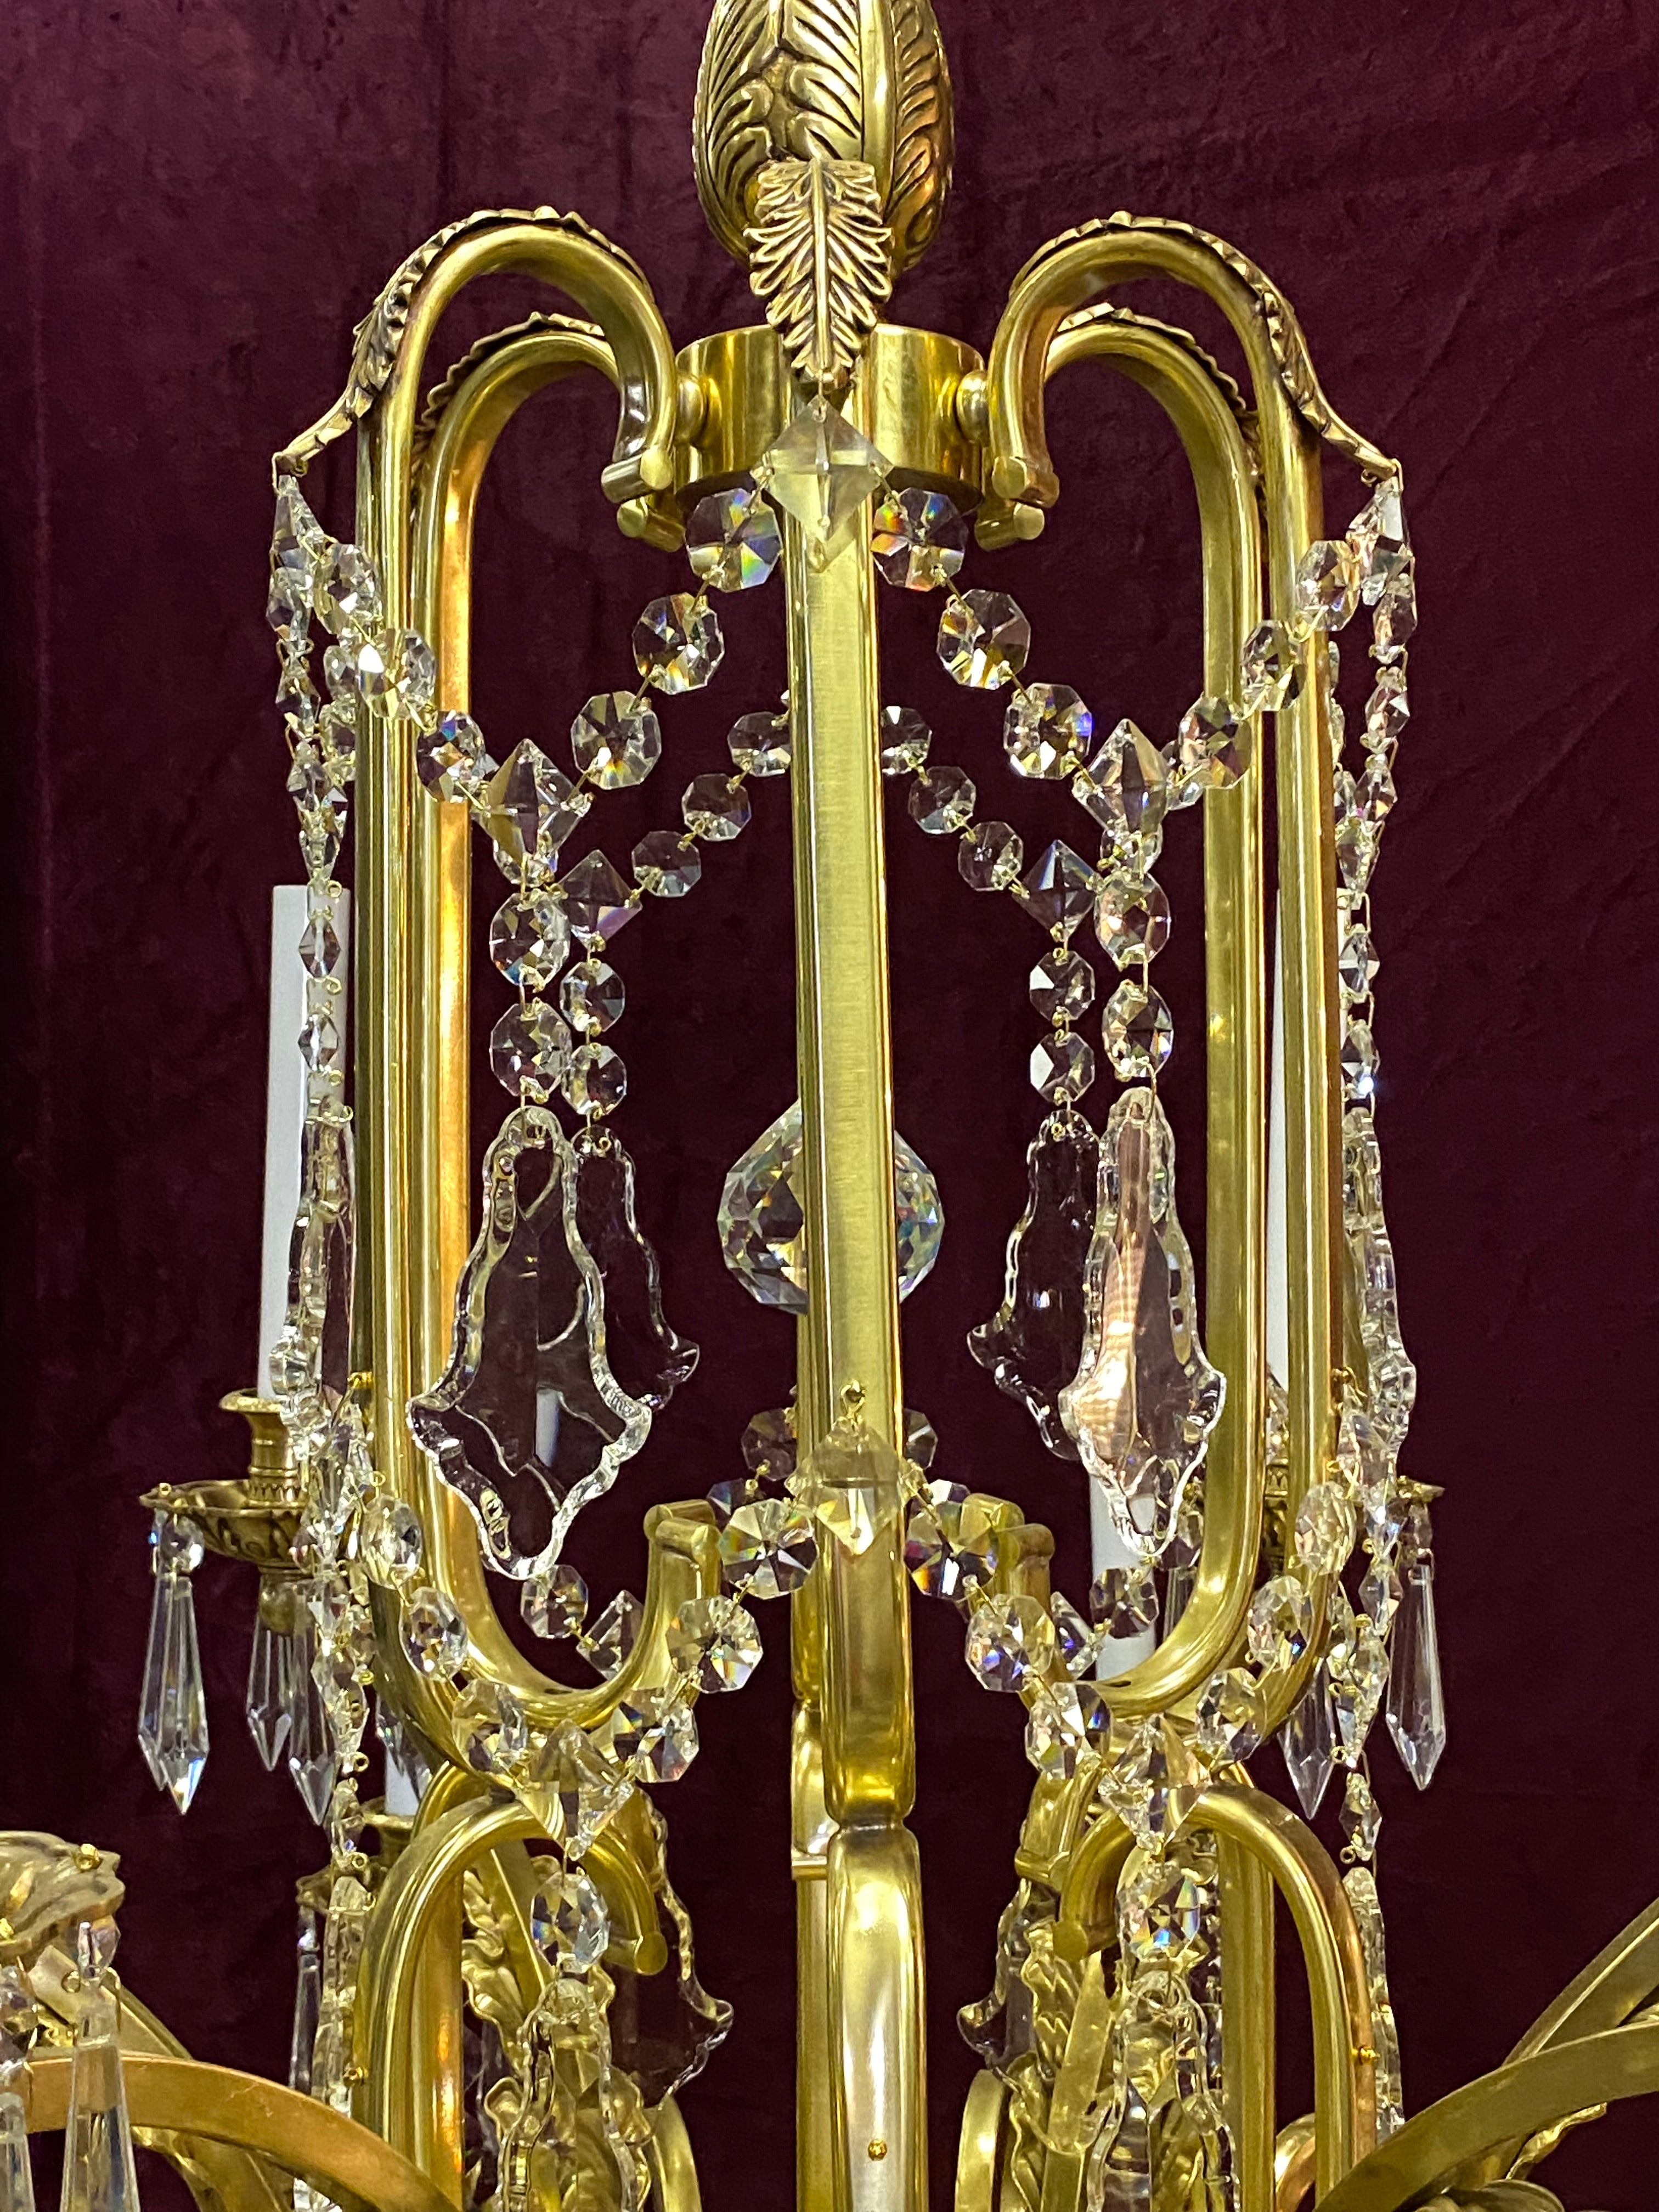 Very Large Brass and Crystal Chandelier with Leafy Details